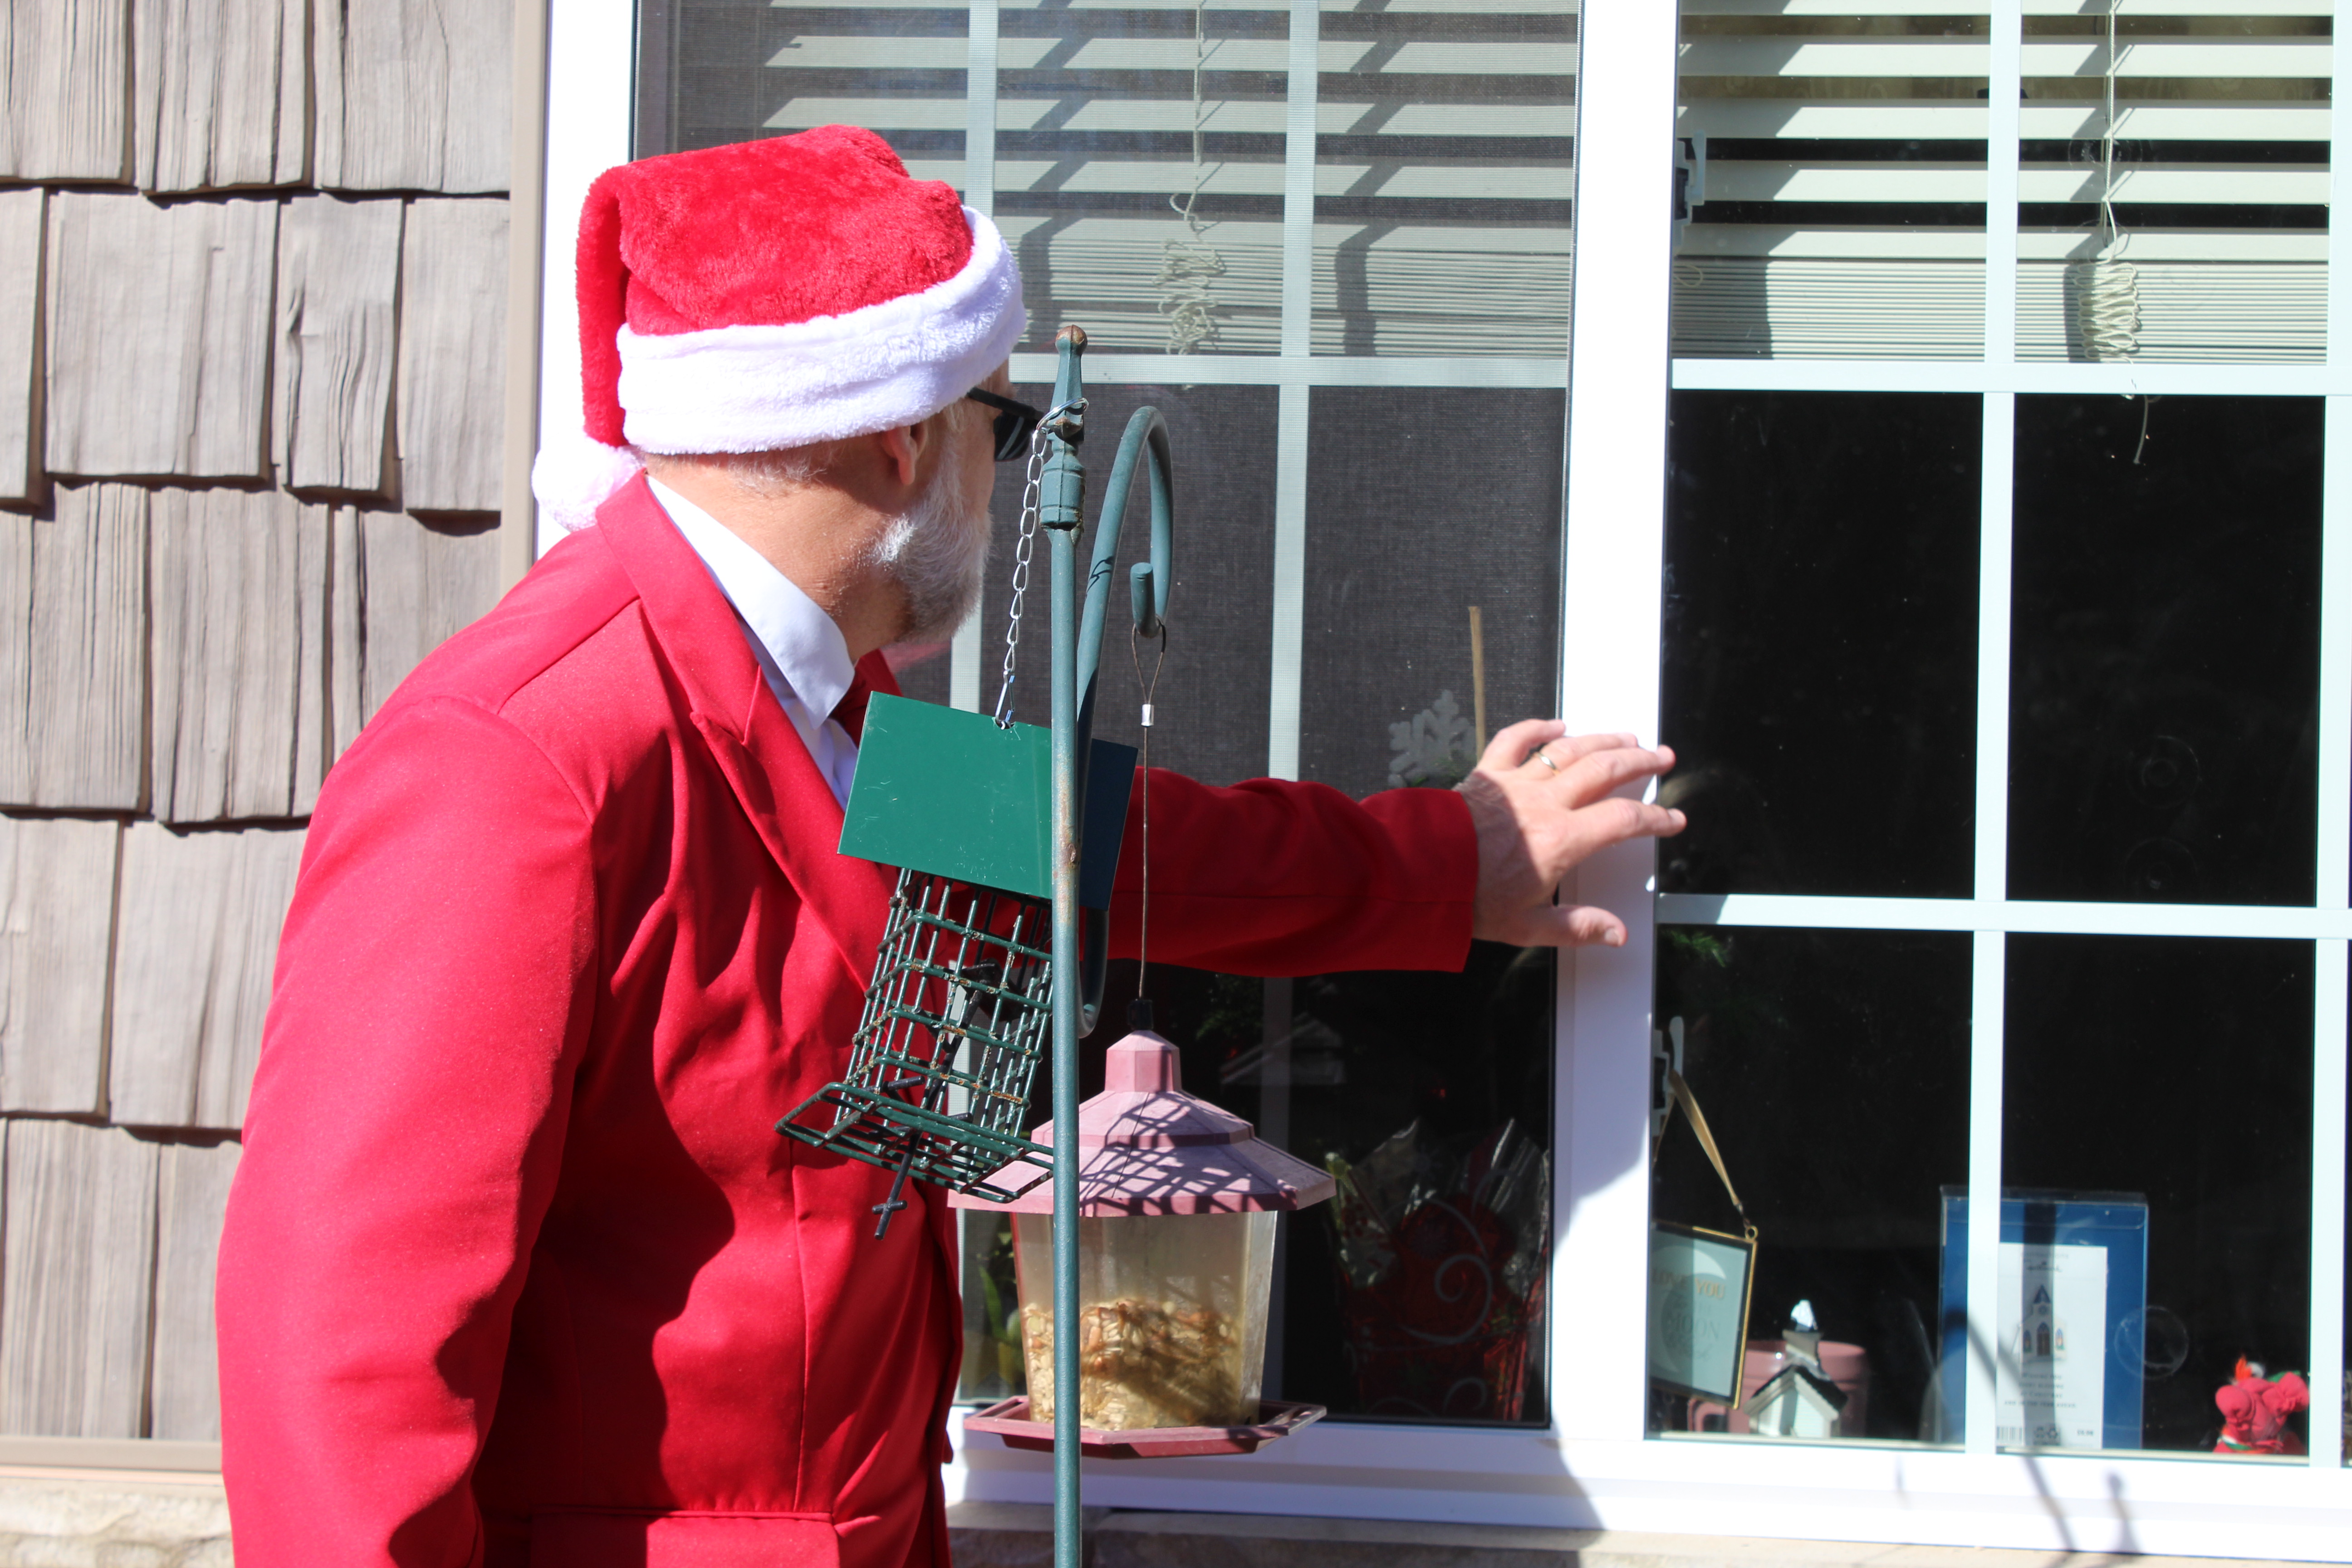 Spruce Pine Police Chief Bill Summerlin reaches out to say hello to a resident of one of the county’s assisted living facilities on Friday, Dec. 18. Summerlin, dressed as Santa Claus, went around and spread holiday cheer via the windows, due to the ongoing pandemic. (MNJ photo/Juliana Walker)